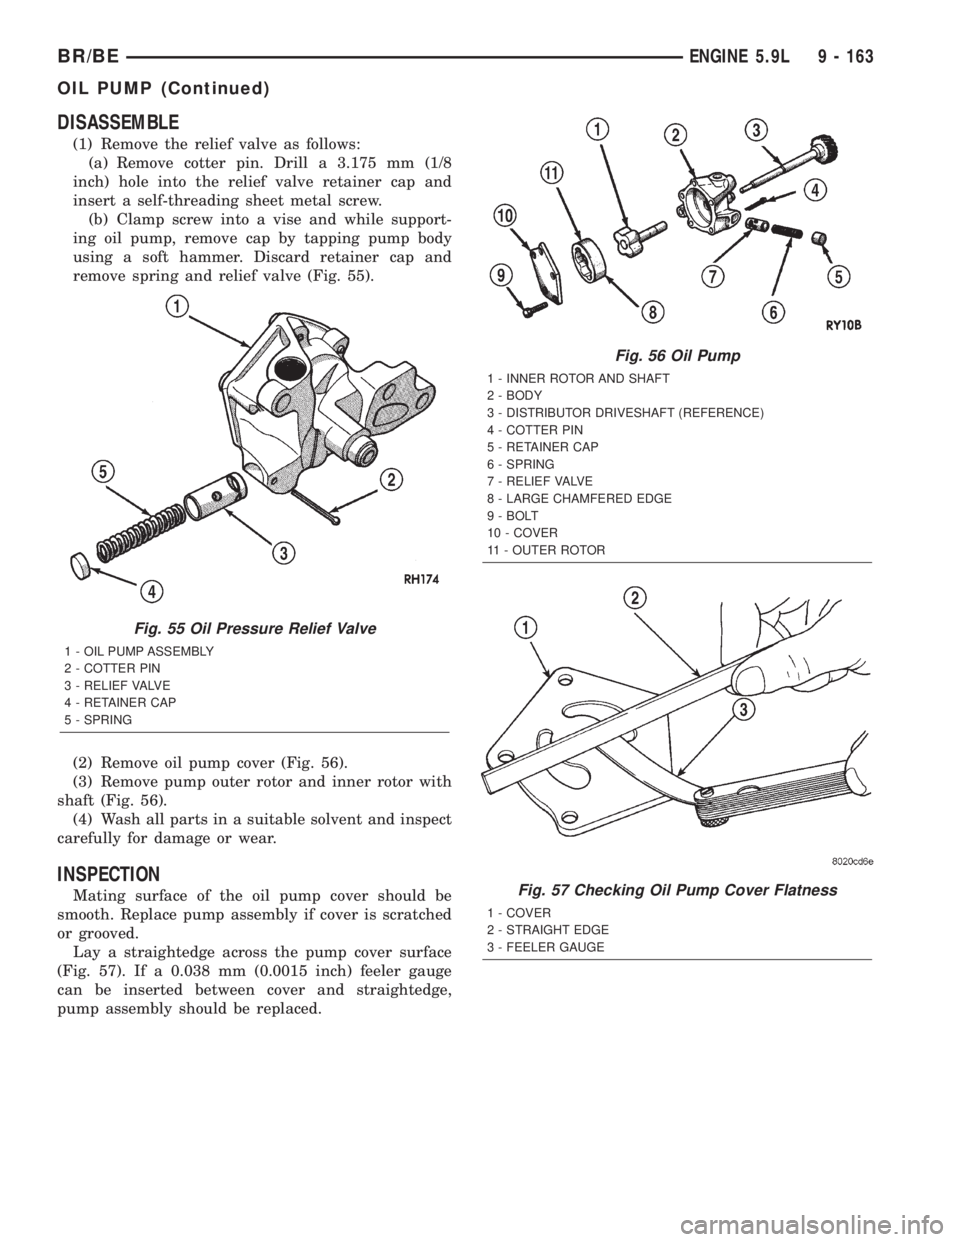 DODGE RAM 2001  Service Repair Manual DISASSEMBLE
(1) Remove the relief valve as follows:
(a) Remove cotter pin. Drill a 3.175 mm (1/8
inch) hole into the relief valve retainer cap and
insert a self-threading sheet metal screw.
(b) Clamp 